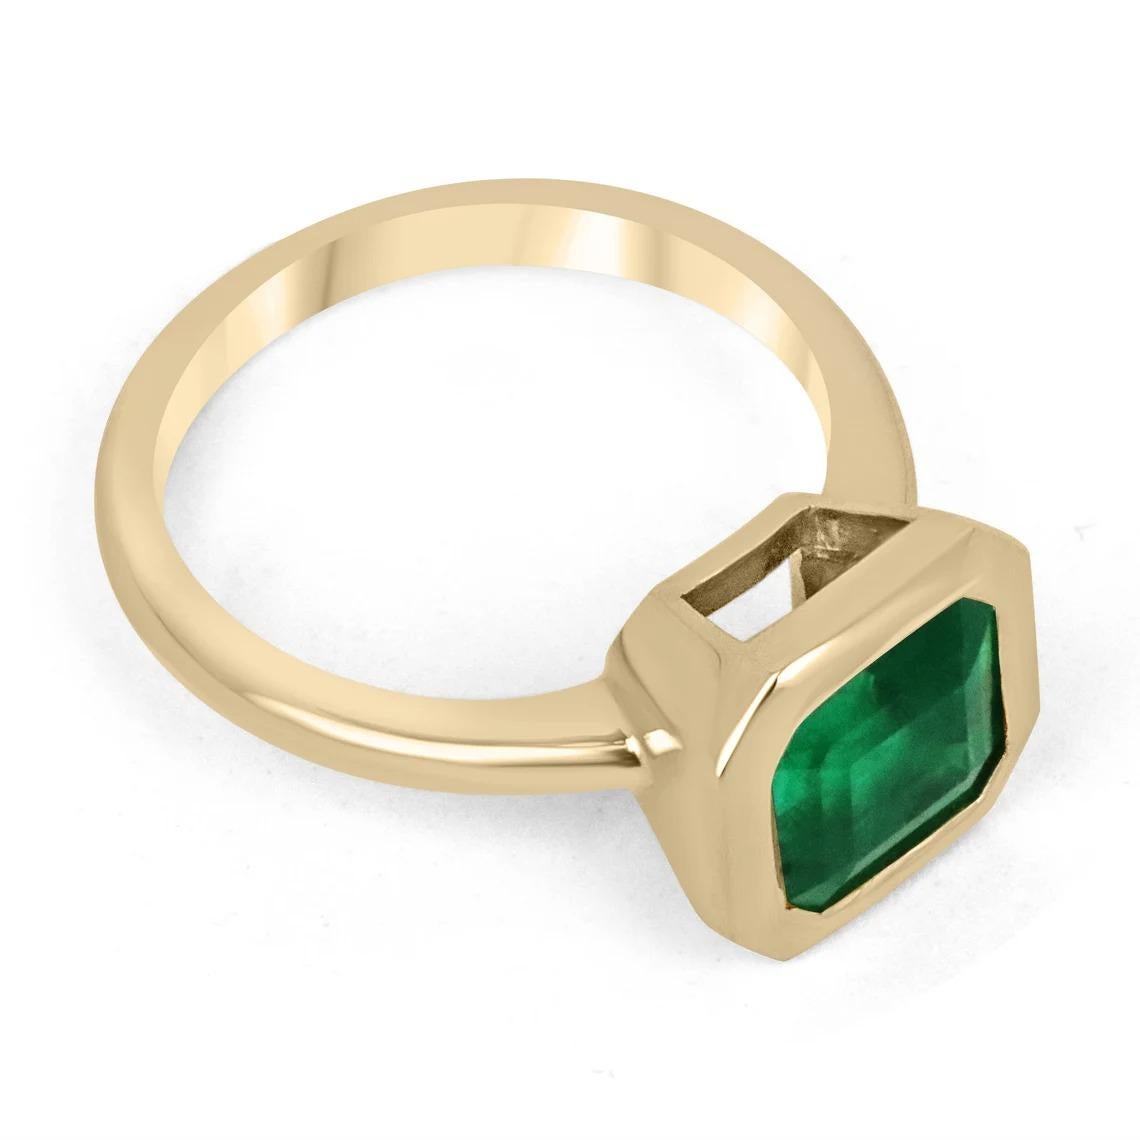 Displayed is a rich dark green AAA+ top-of-the-line Colombian emerald, solitaire, emerald-cut bezel ring in solid 18K yellow gold. This gorgeous solitaire ring carries a full 3.20-carat earth-mined emerald in a sleek and secure bezel setting. The